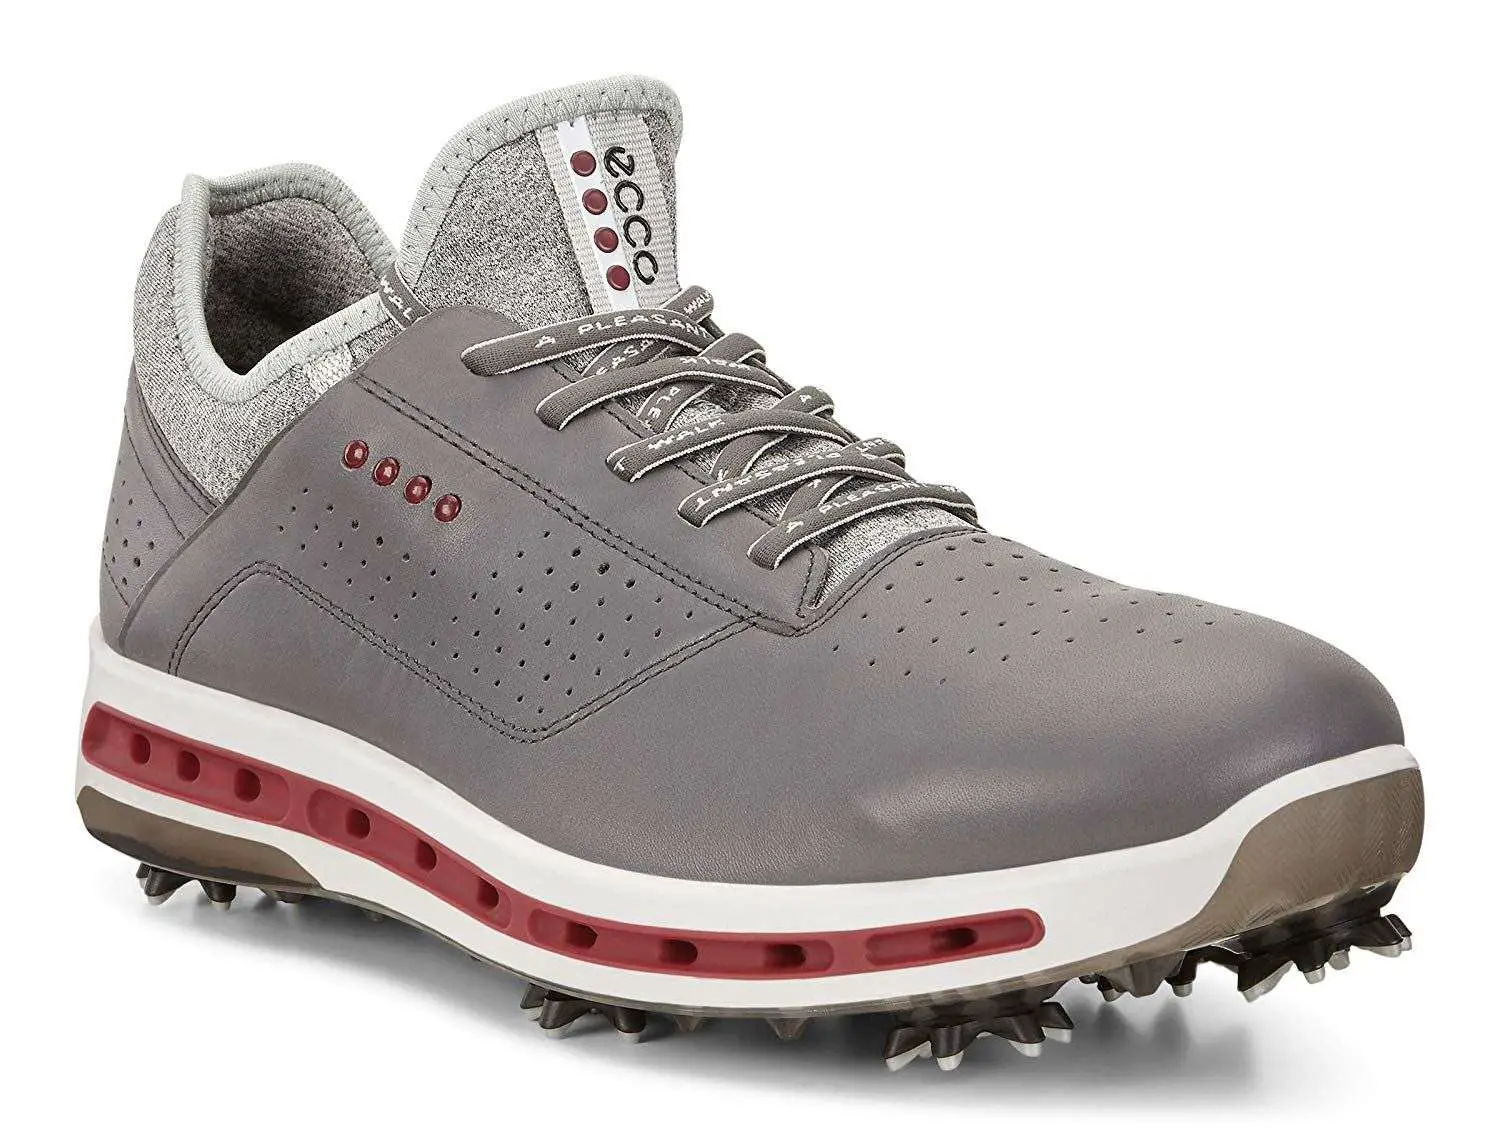 The Best Golf Shoes of 2020  ReviewThis